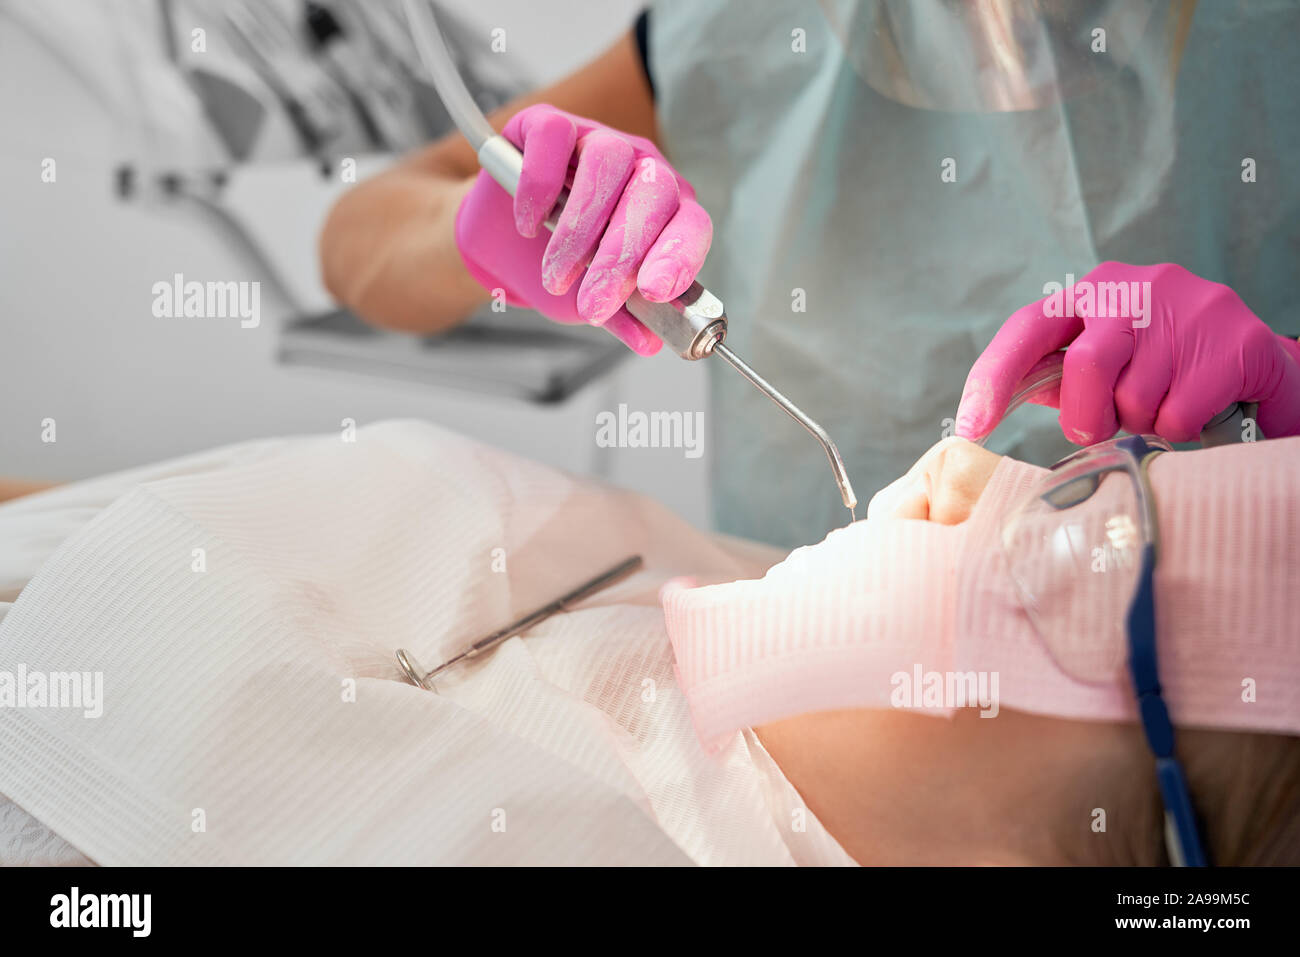 Patient of dental clinic sitting in dental chair with white bib and protective glasses. Dentist in rubber gloves holding tool, fitting teeth. Doctor doing procedure with dental curing UV light. Stock Photo